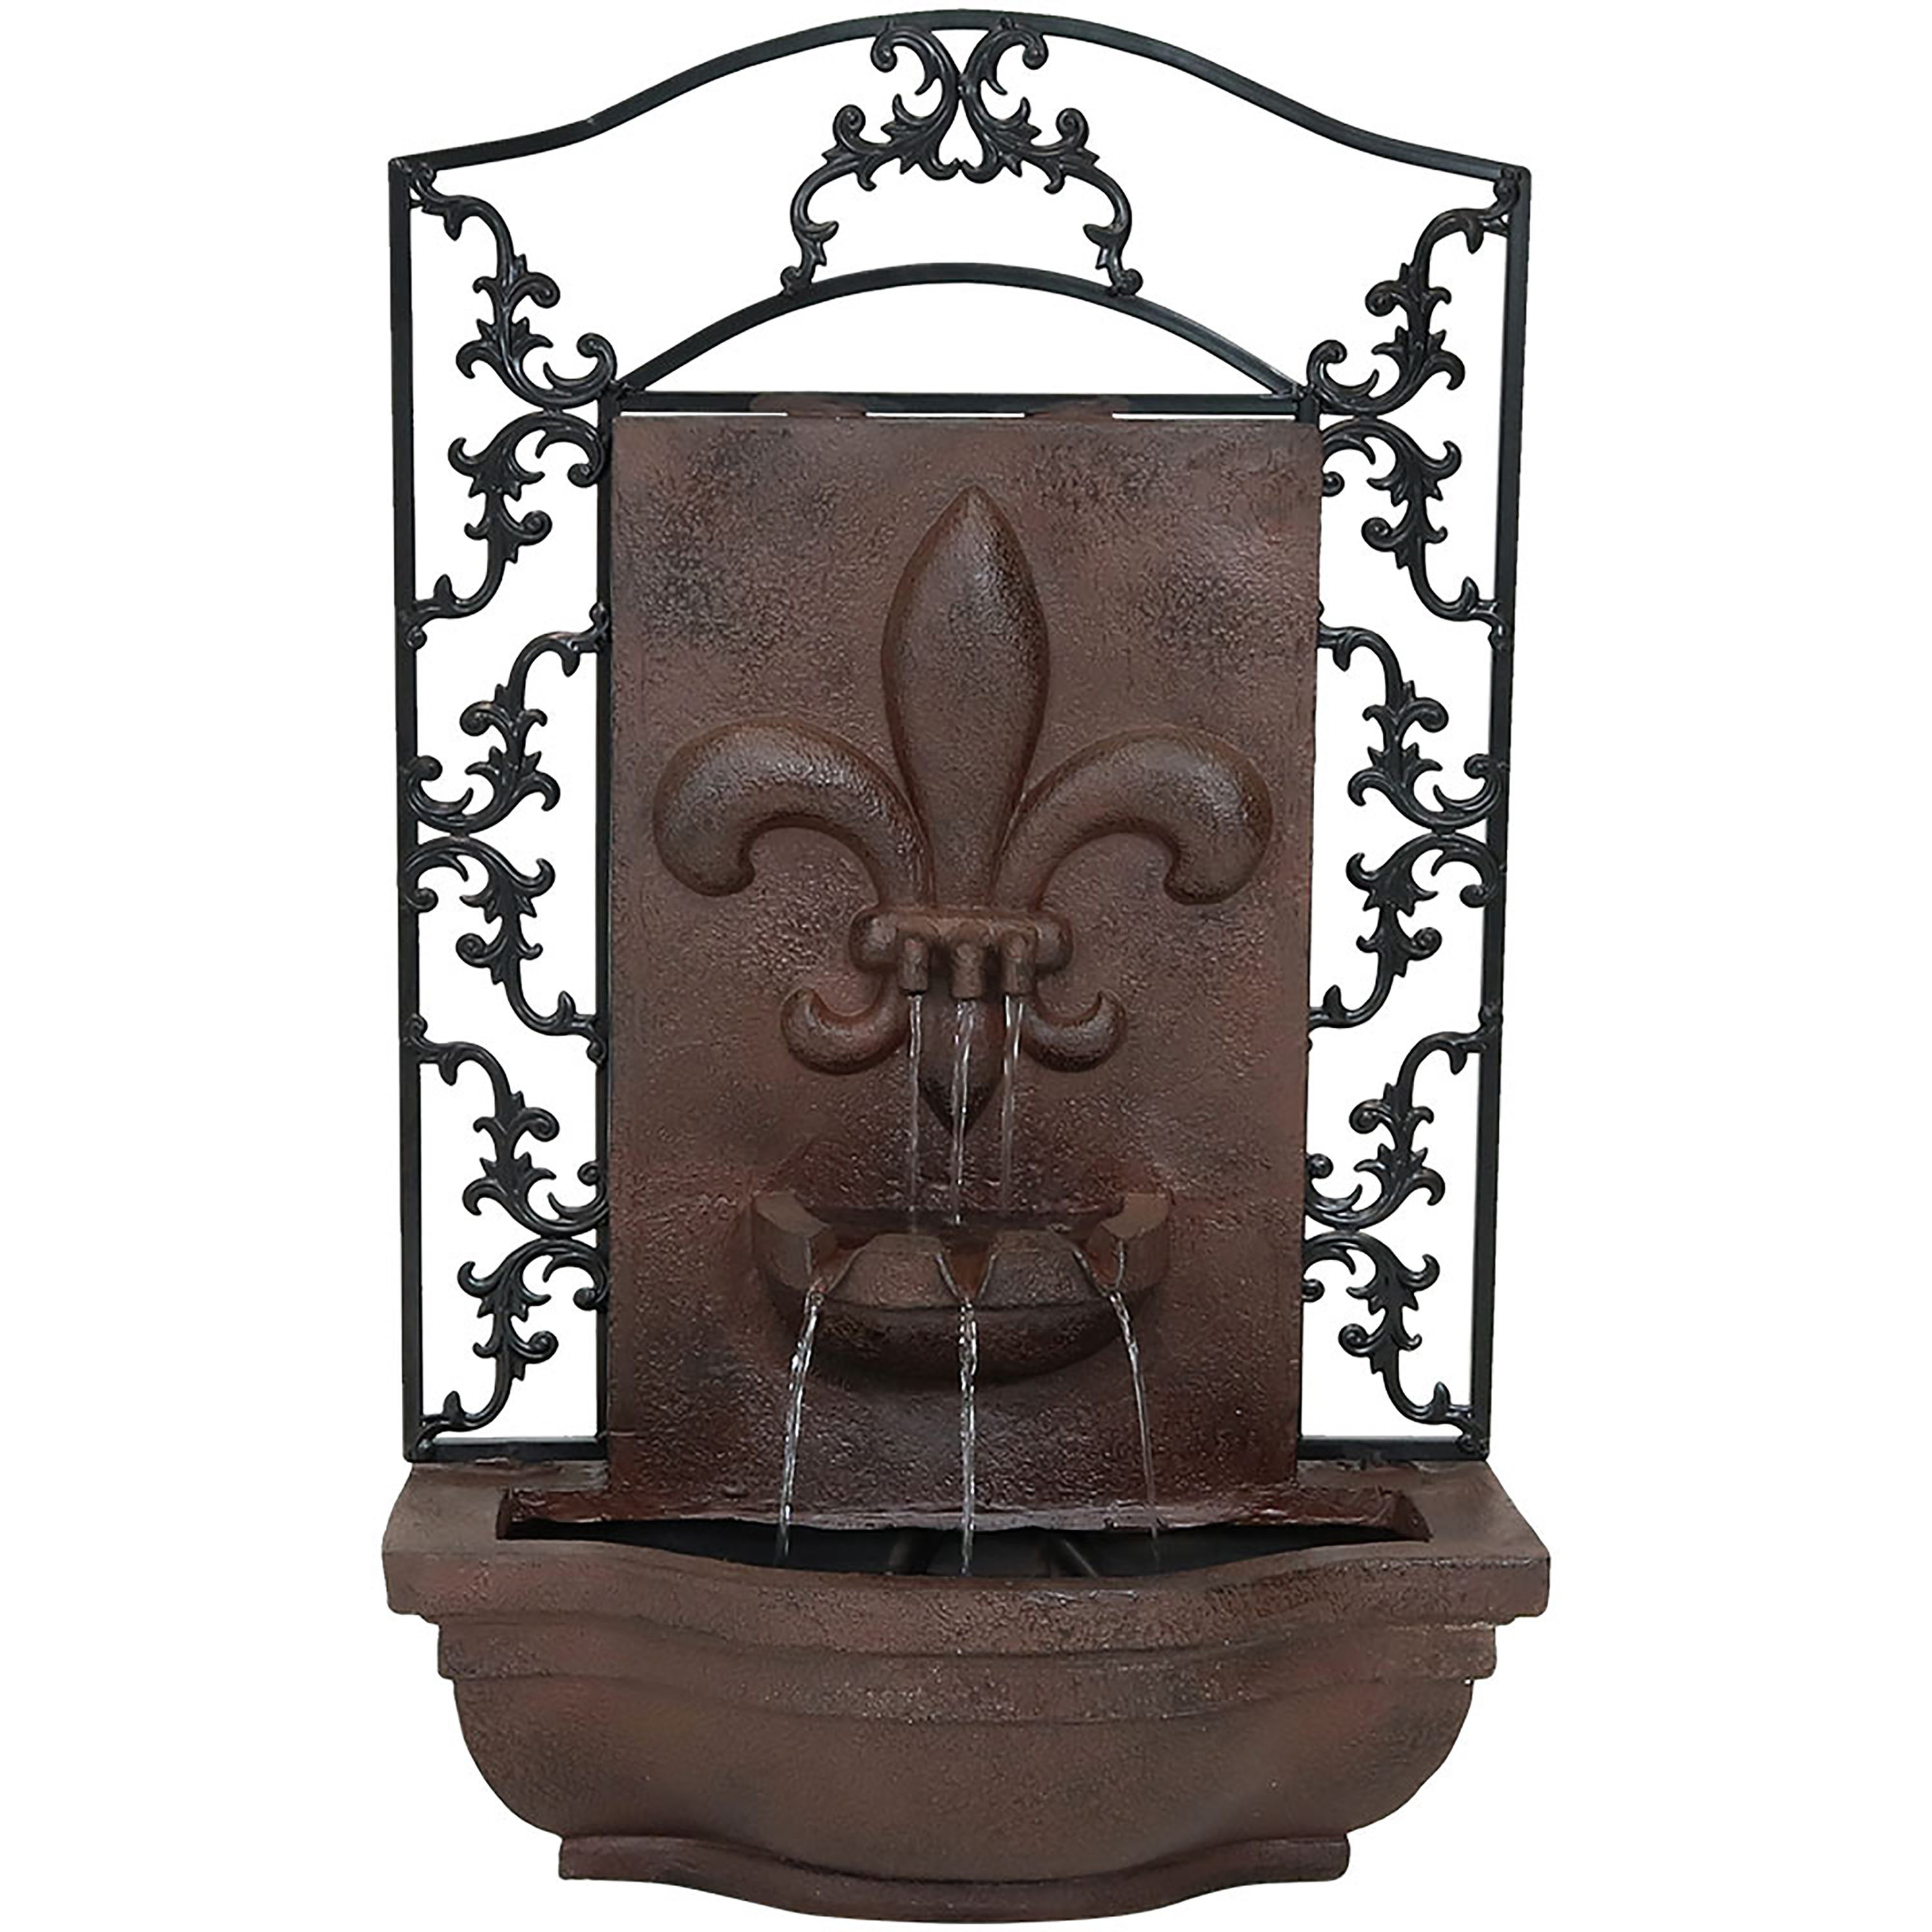 Sunnydaze French Lily Solar Outdoor Wall Fountain, Includes Solar Pump and Panel, Iron, Solar with Battery Backup Feature